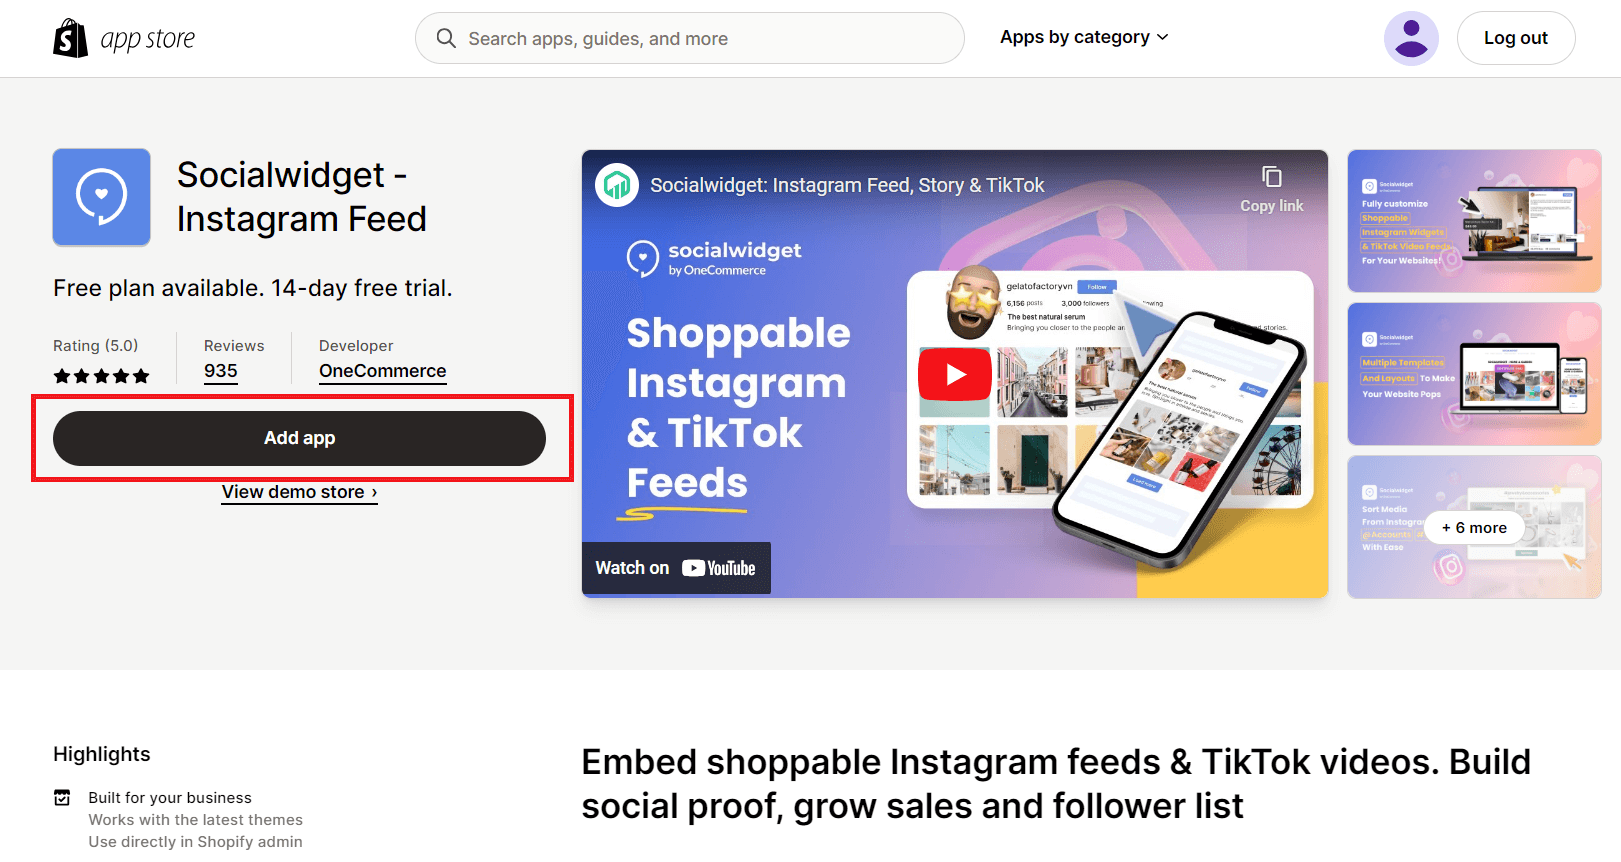 Add Socialwidget app to your Shopify store